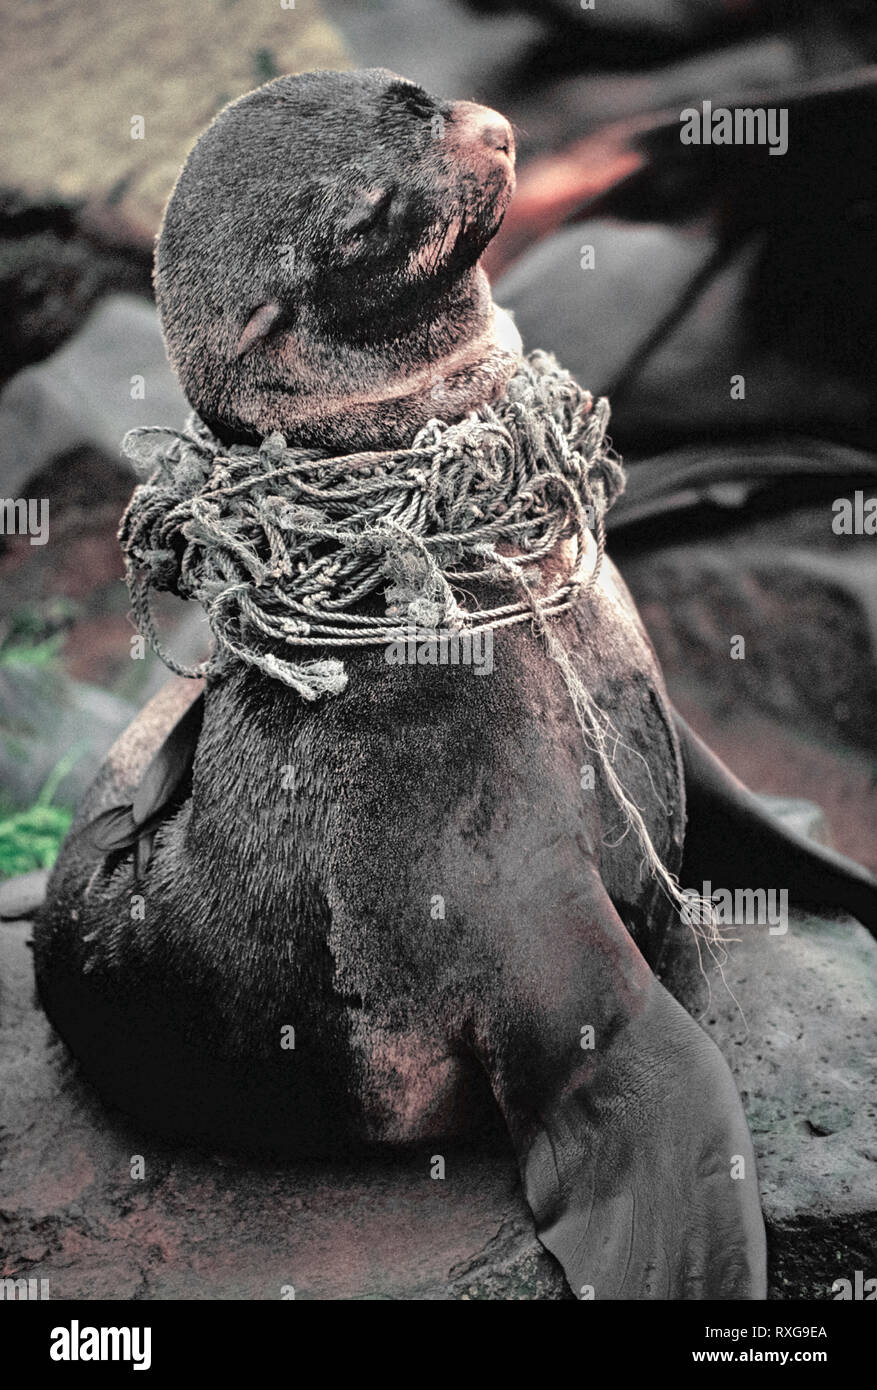 A distressed Northern Fur Seal (Callorhinus ursinus) that has been entangled in a fishing net in the Bering Sea rests ashore at St. Paul Island, one of the Pribilof Islands of Alaska, USA. The number of net entanglements involving such seals is among the highest of all pinniped species. Photo copyrighted by Michele and Tom Grimm. Stock Photo